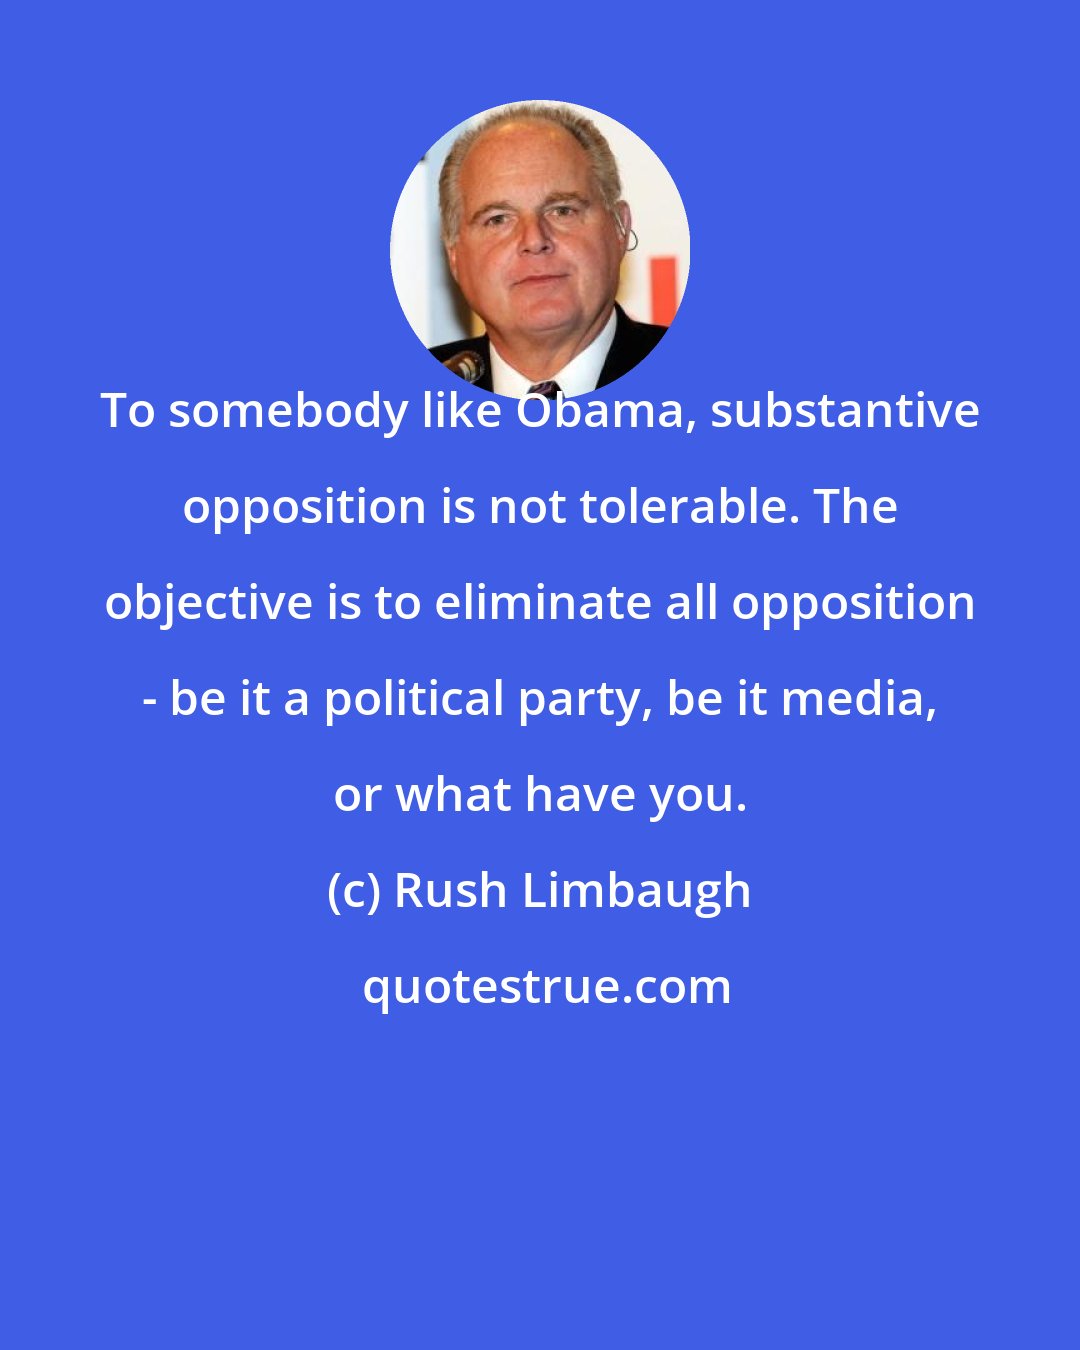 Rush Limbaugh: To somebody like Obama, substantive opposition is not tolerable. The objective is to eliminate all opposition - be it a political party, be it media, or what have you.